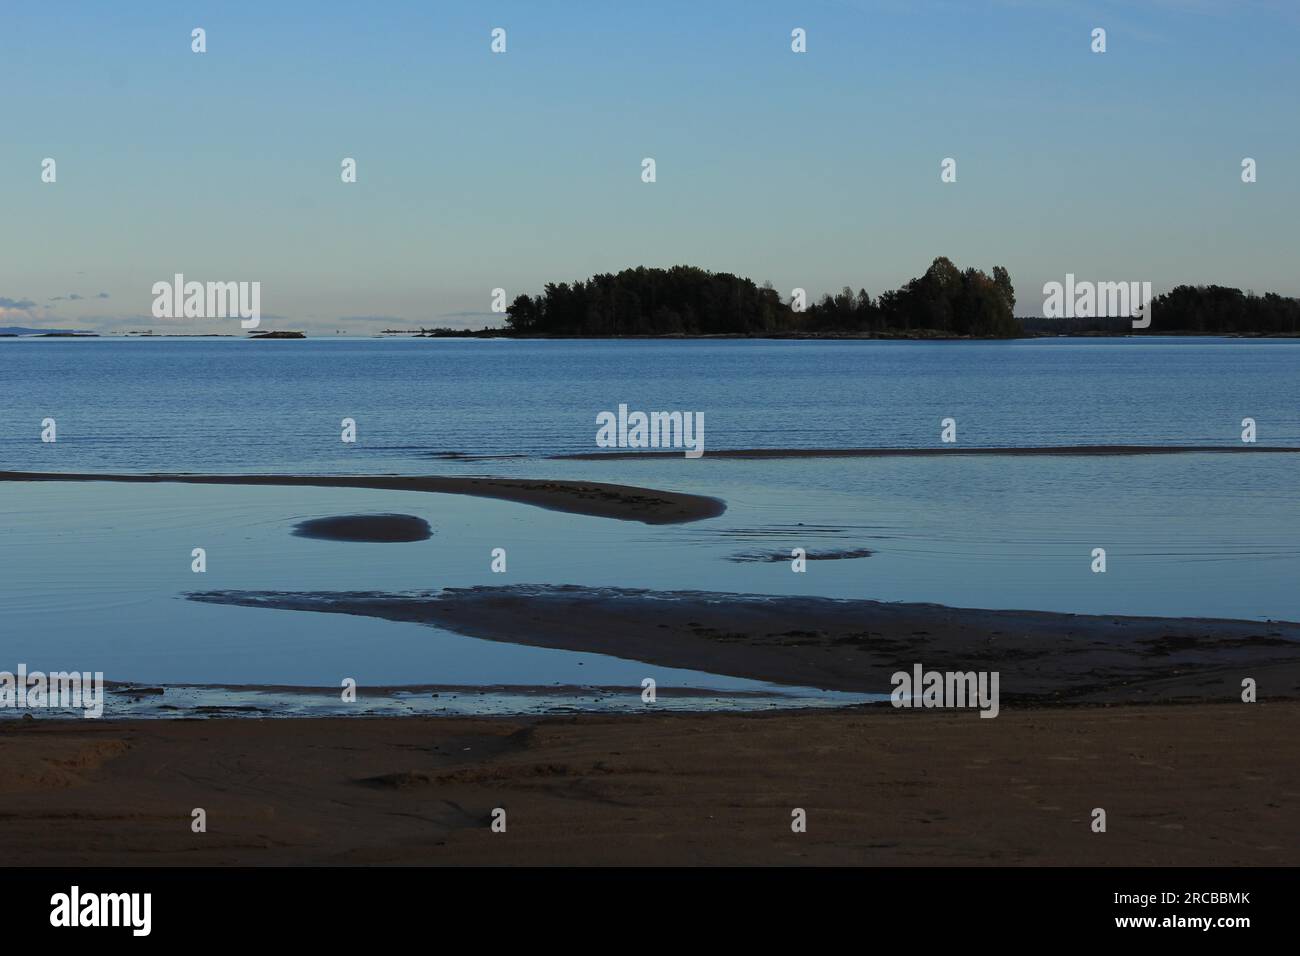 Natural shapes on a sand beach in Mellerud. Evening scene at Lake Vanern. Sweden Stock Photo